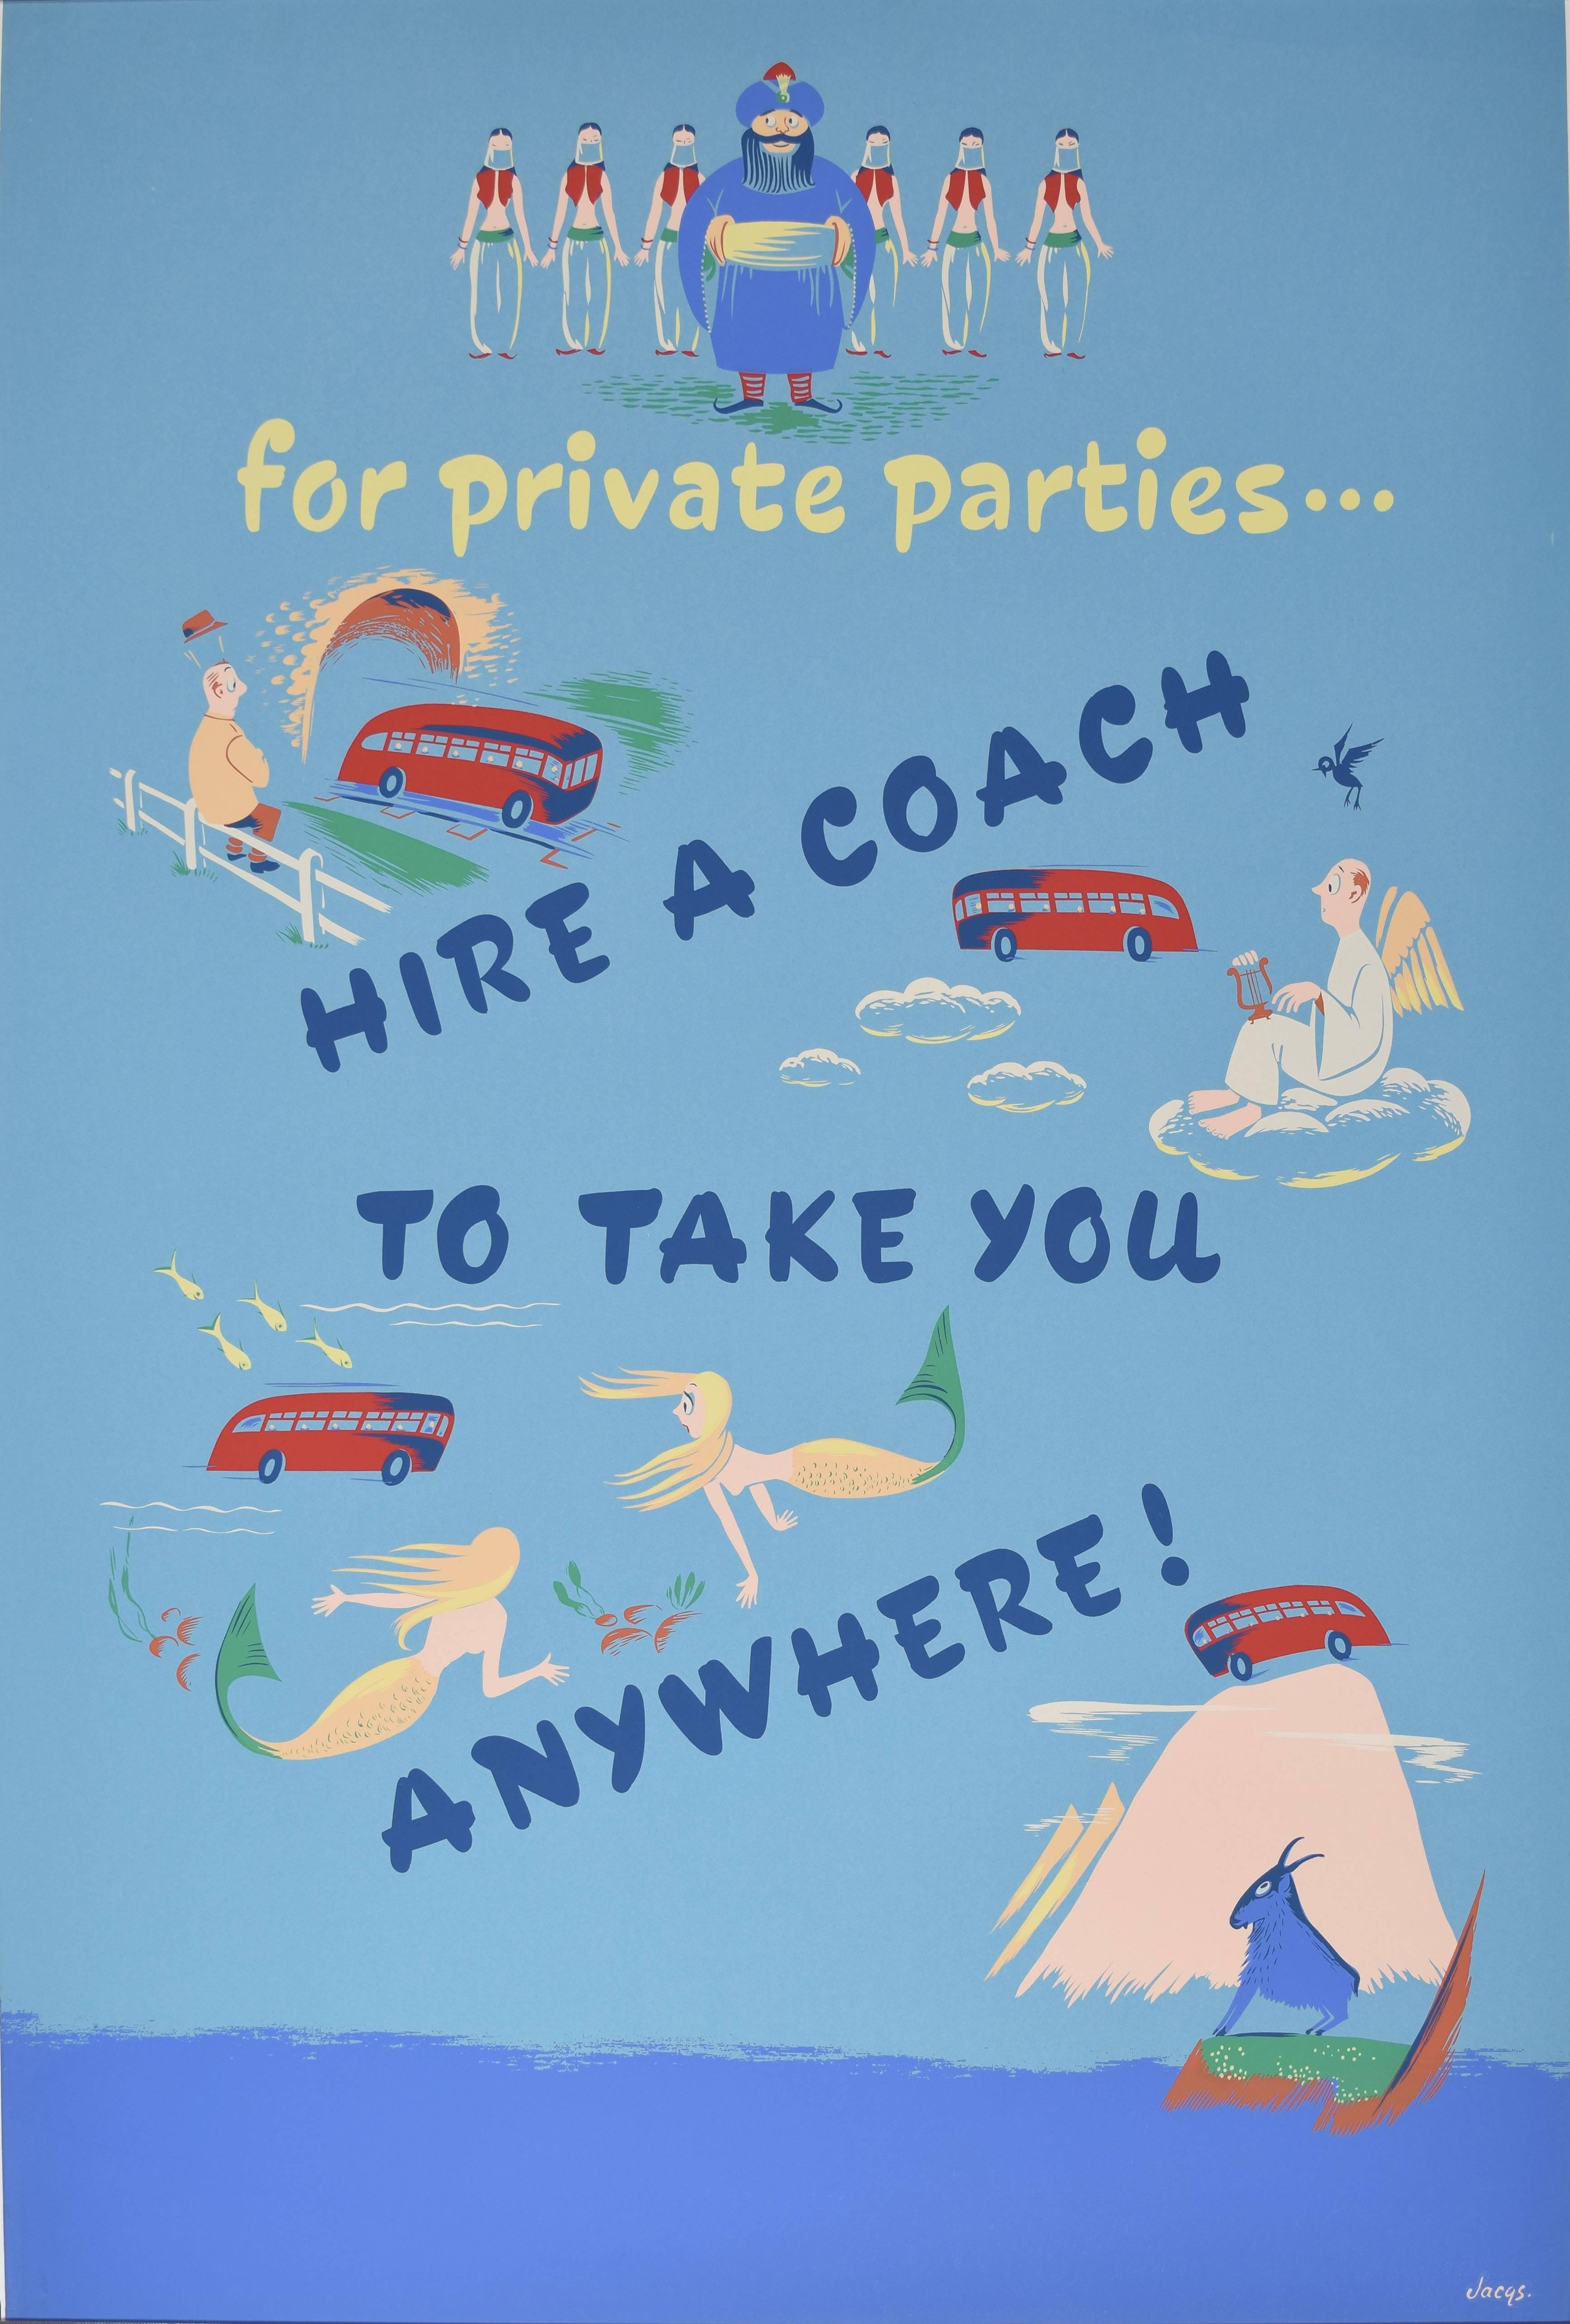 For Private Parties... Hire a Coach Vintage British - English Travel Poster - Print by Unknown